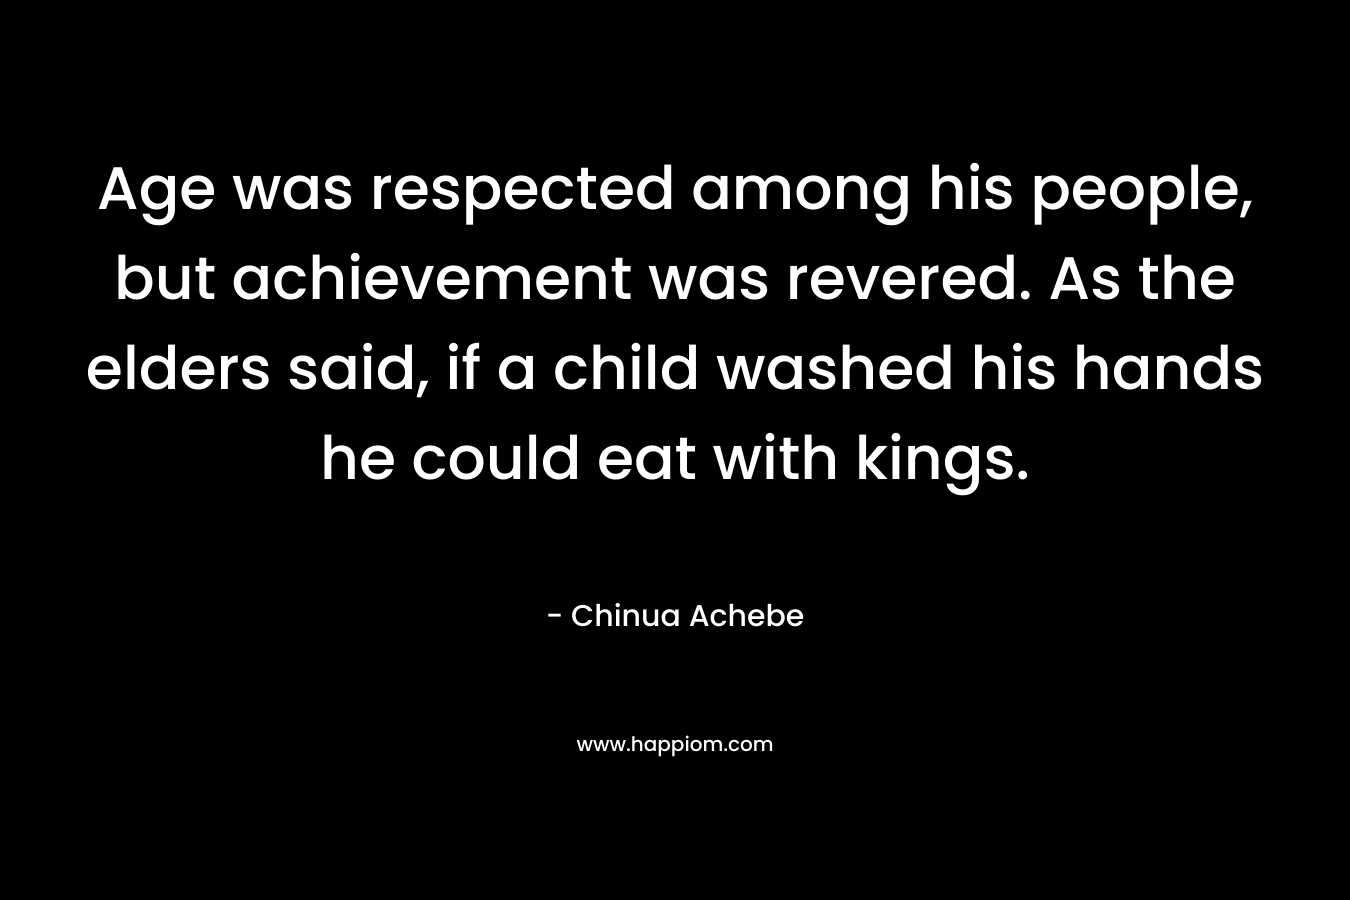 Age was respected among his people, but achievement was revered. As the elders said, if a child washed his hands he could eat with kings. – Chinua Achebe